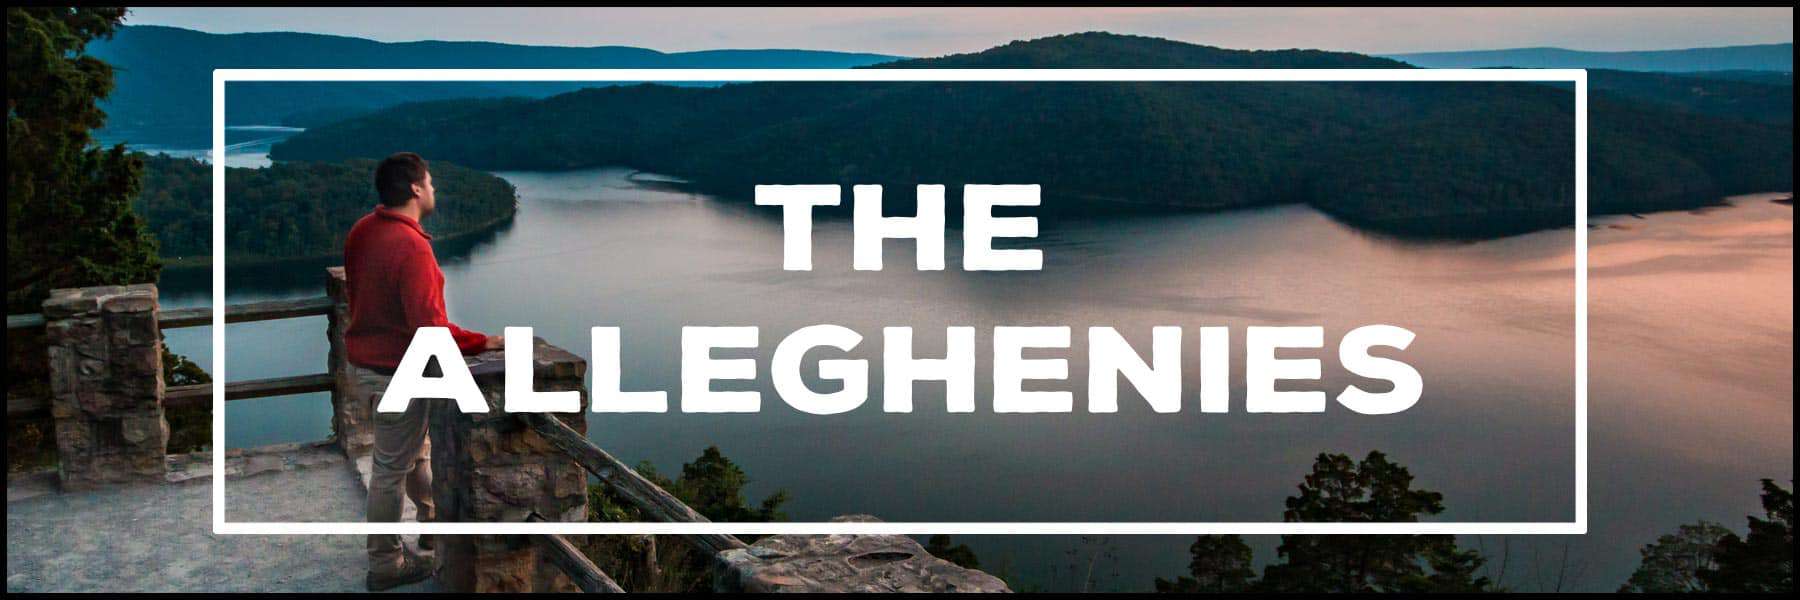 The best things to do in the Alleghenies of Pennsylvania